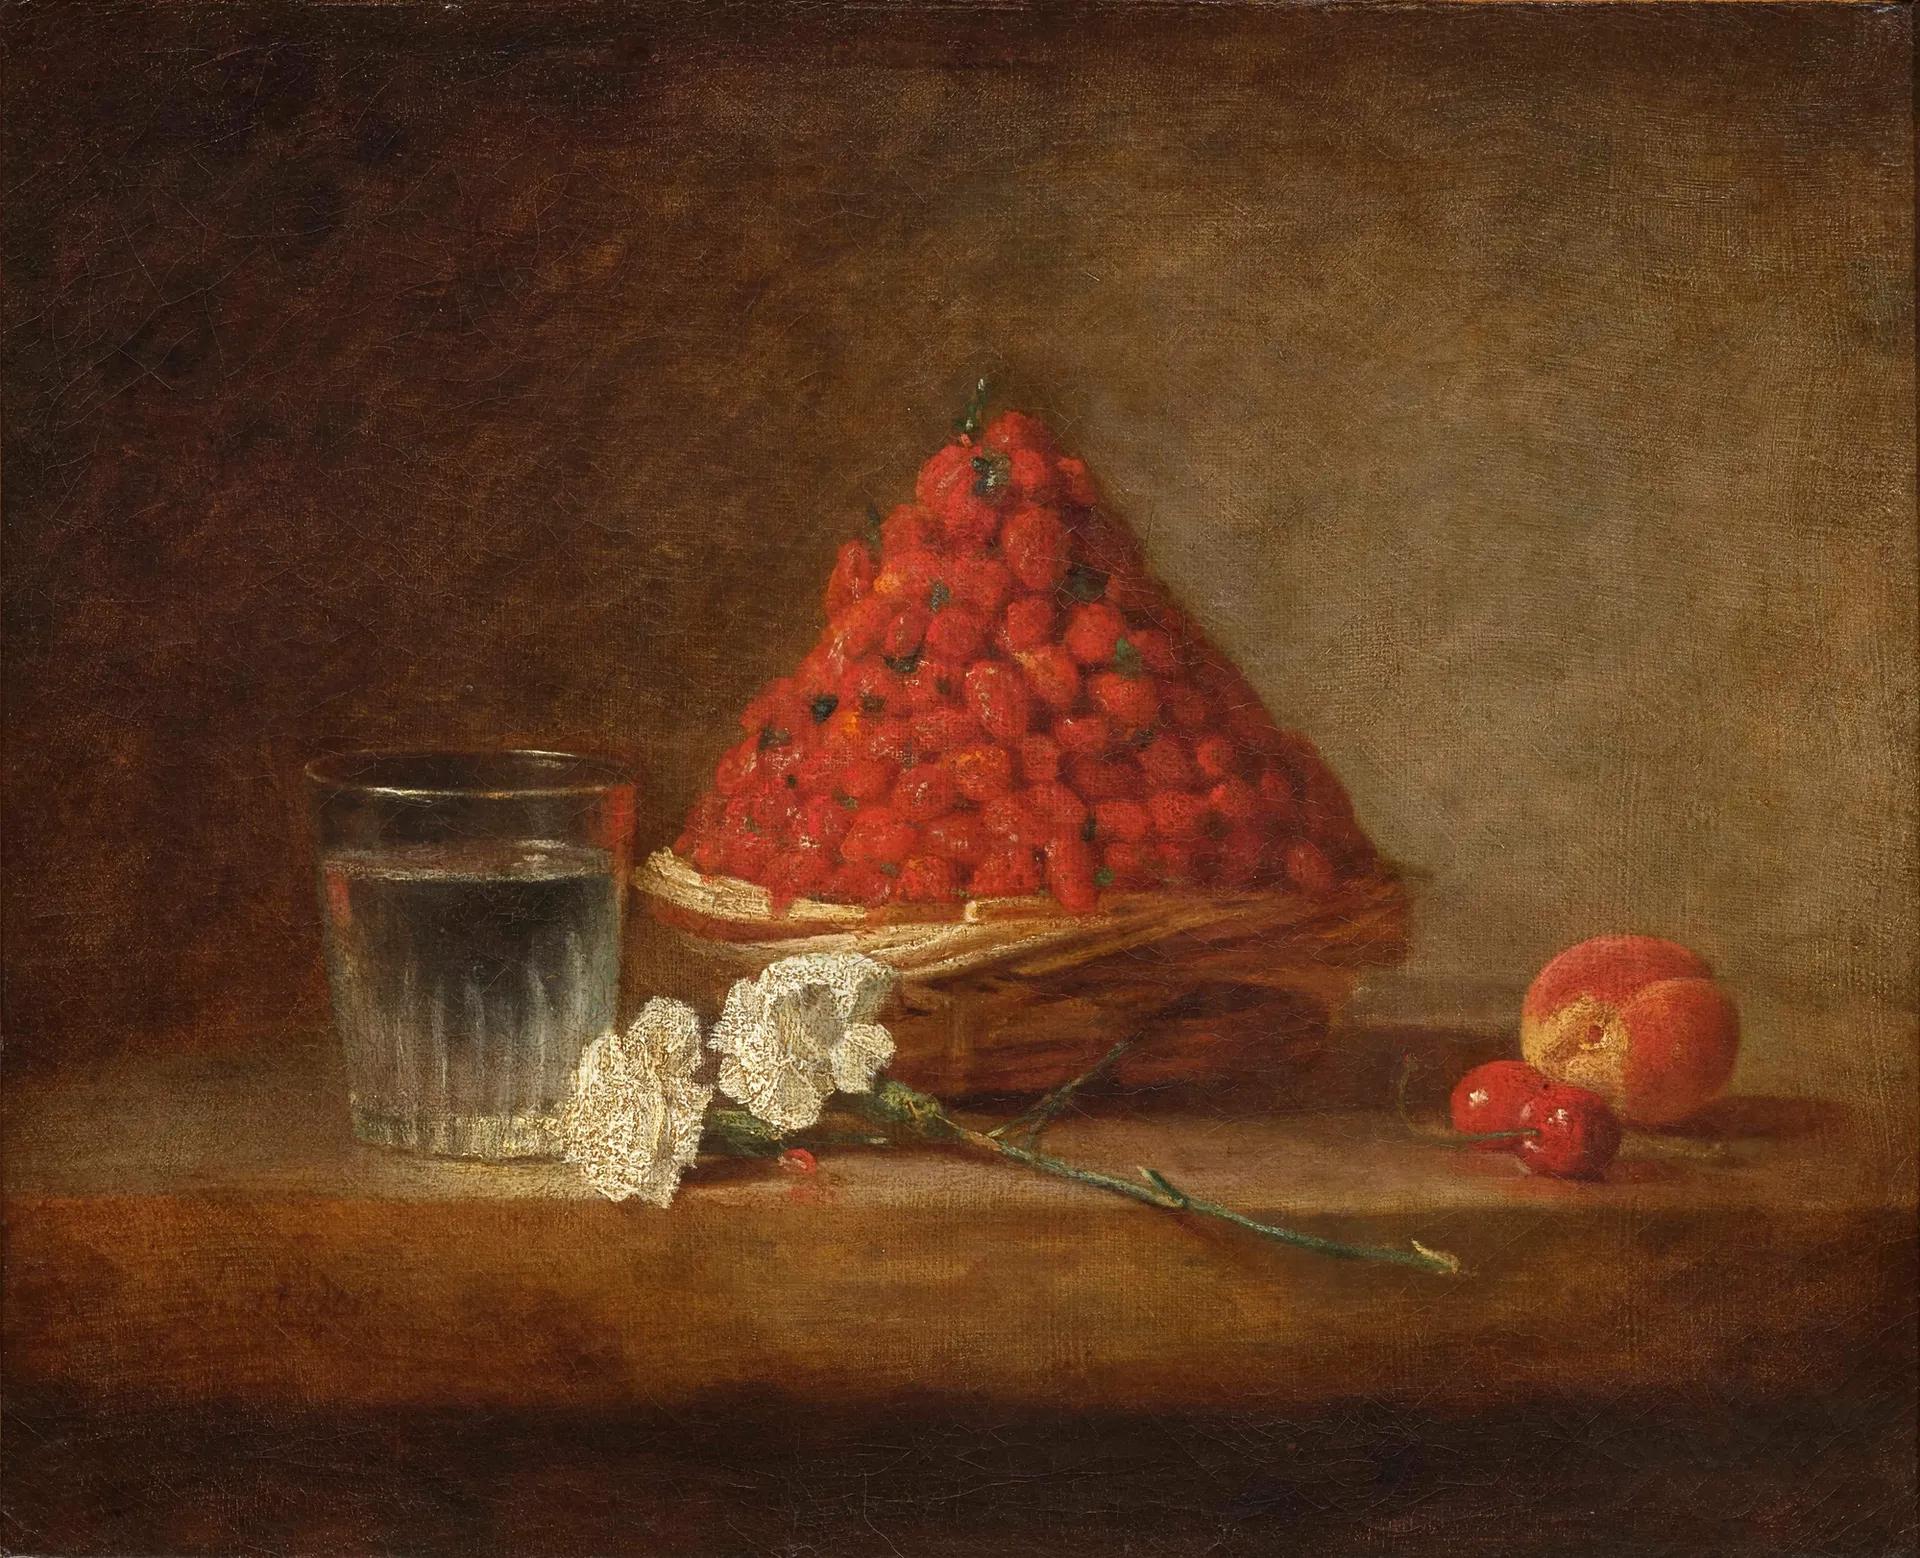 Basket of Wild Strawberries by Chardin was sold at Artcurial in March

Courtesy of Artcurial